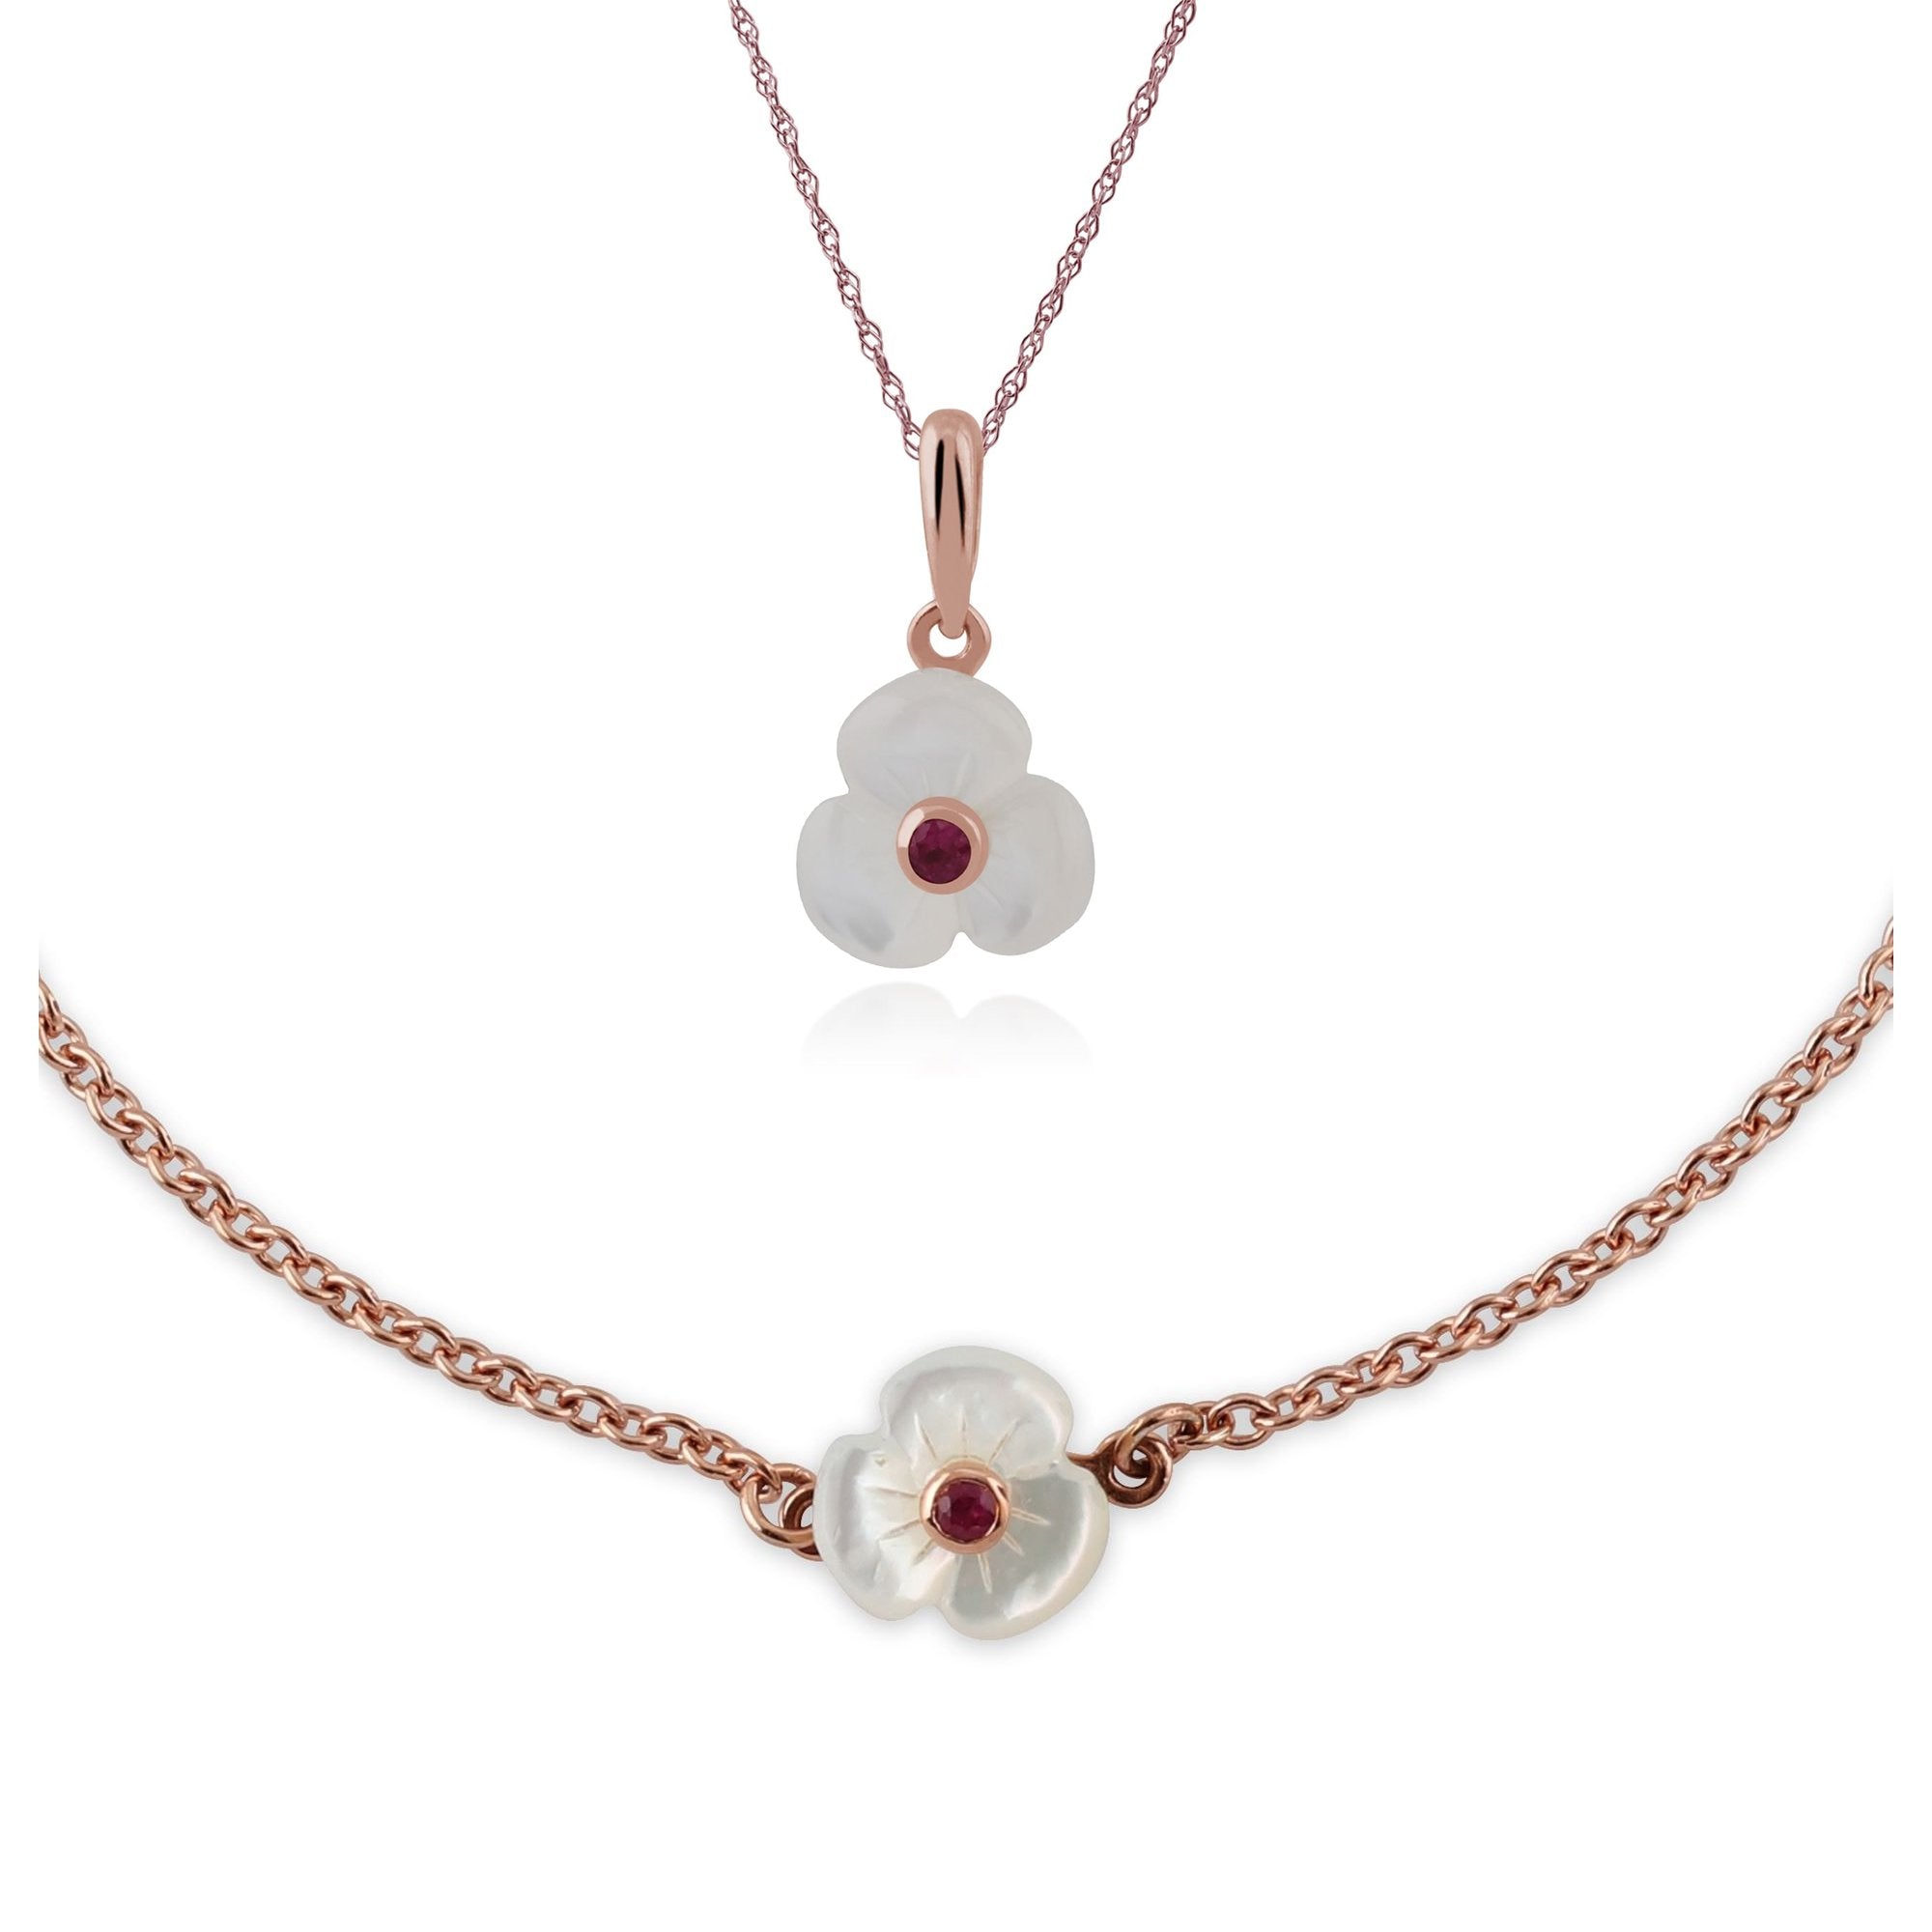 Floral Round Ruby & Mother of Pearl Daisy Pendant & Bracelet Set in Rose Gold Plated 925 Sterling Silver